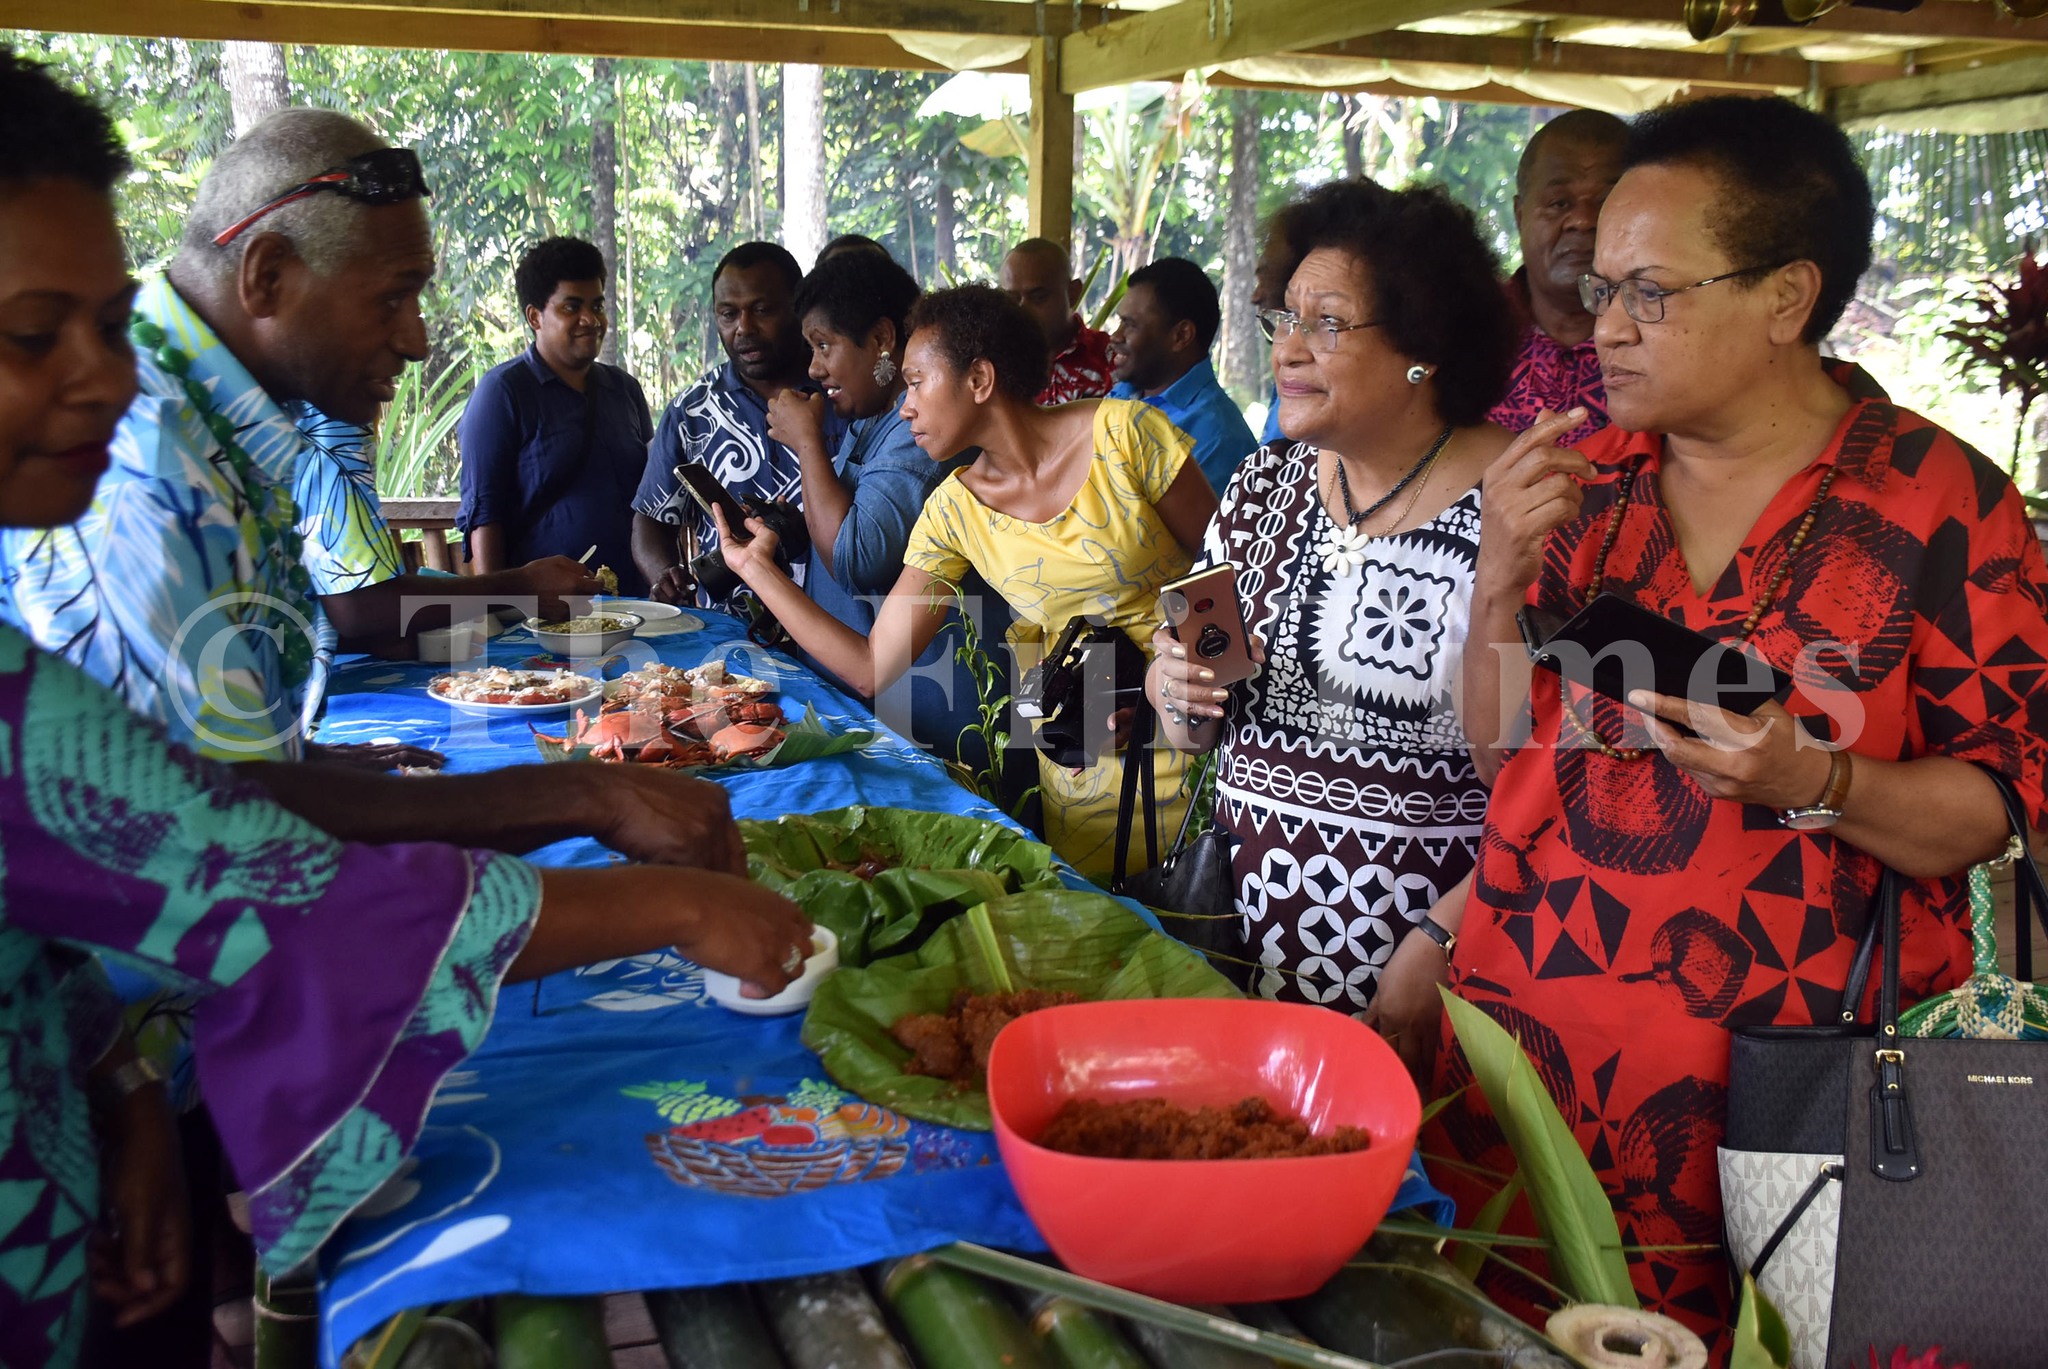 Food security, health | ‘Need to connect nutrition to traditional food systems’